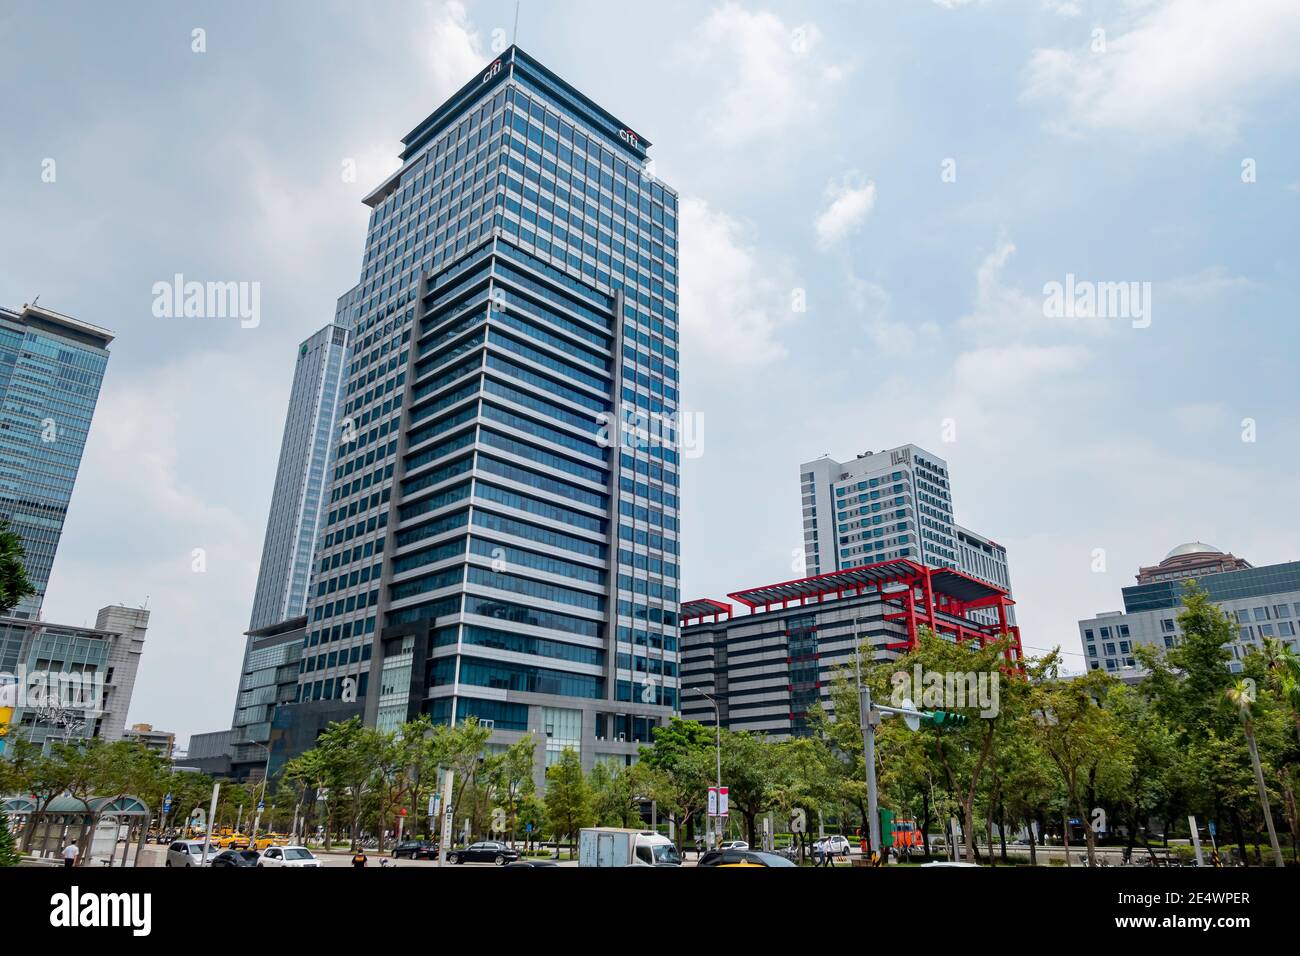 Taipei, AUG 2, 2017 - Morning sunny view of the Xinyi District area Stock Photo